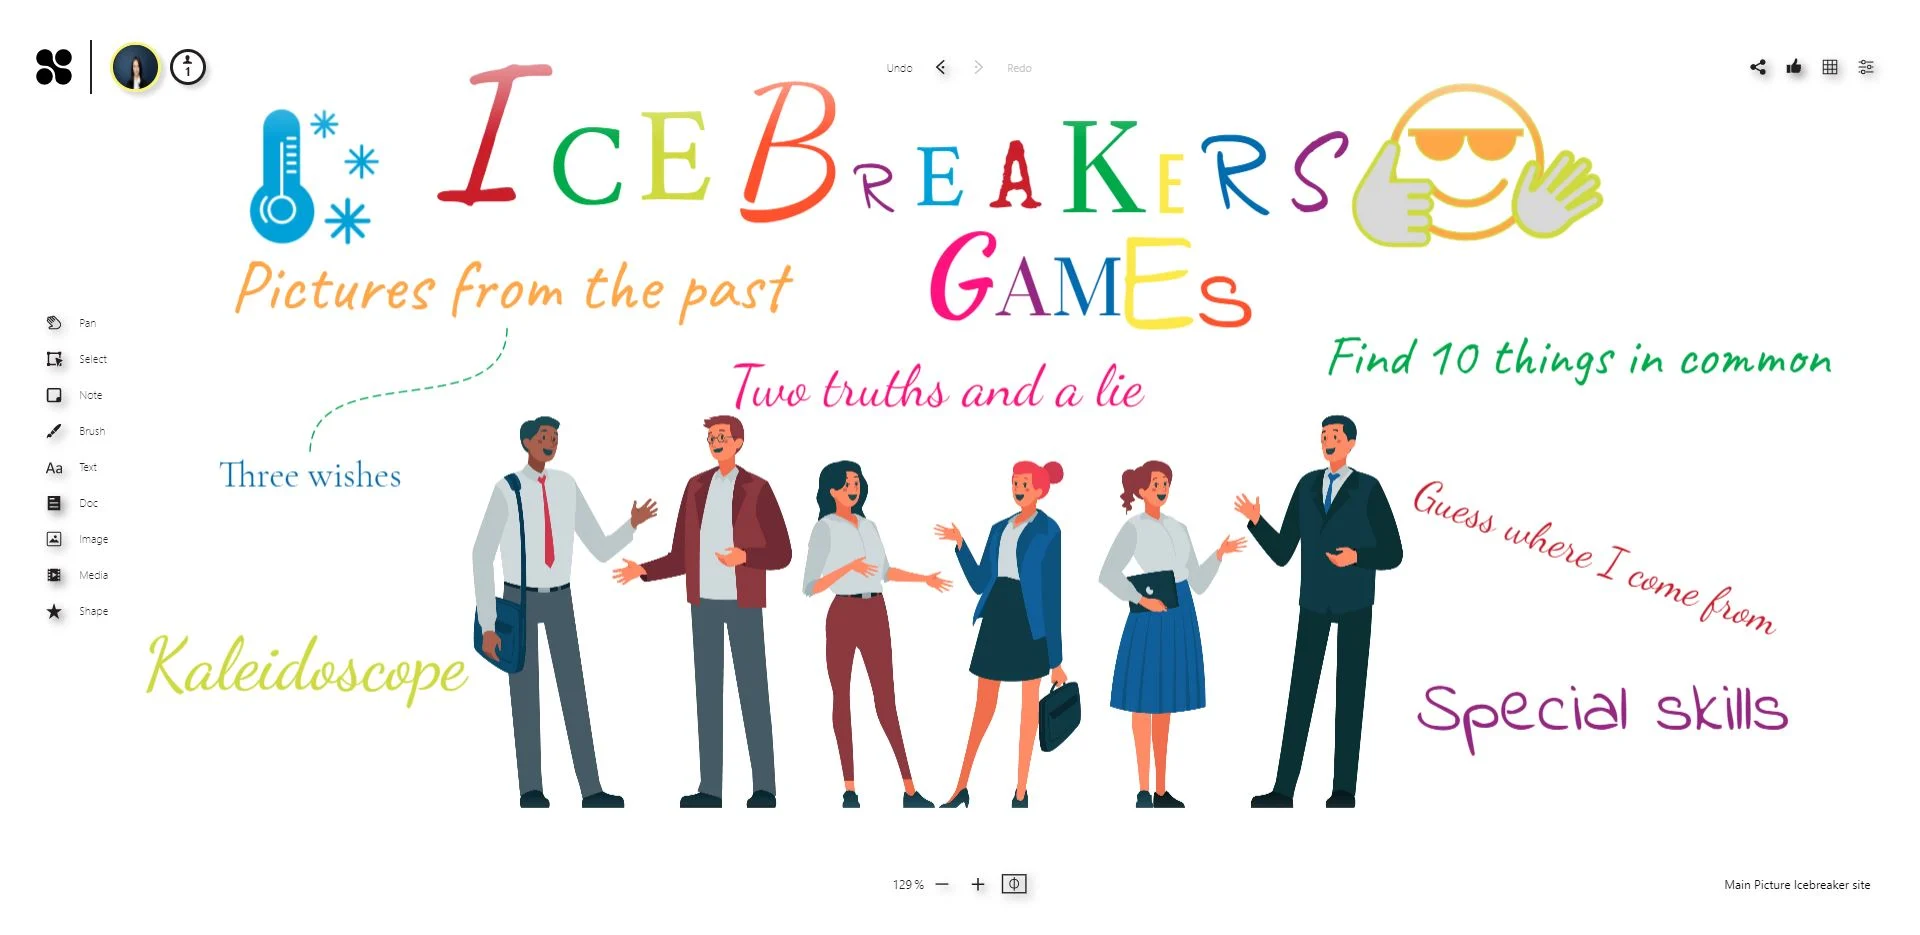 Ice breakers can help agents